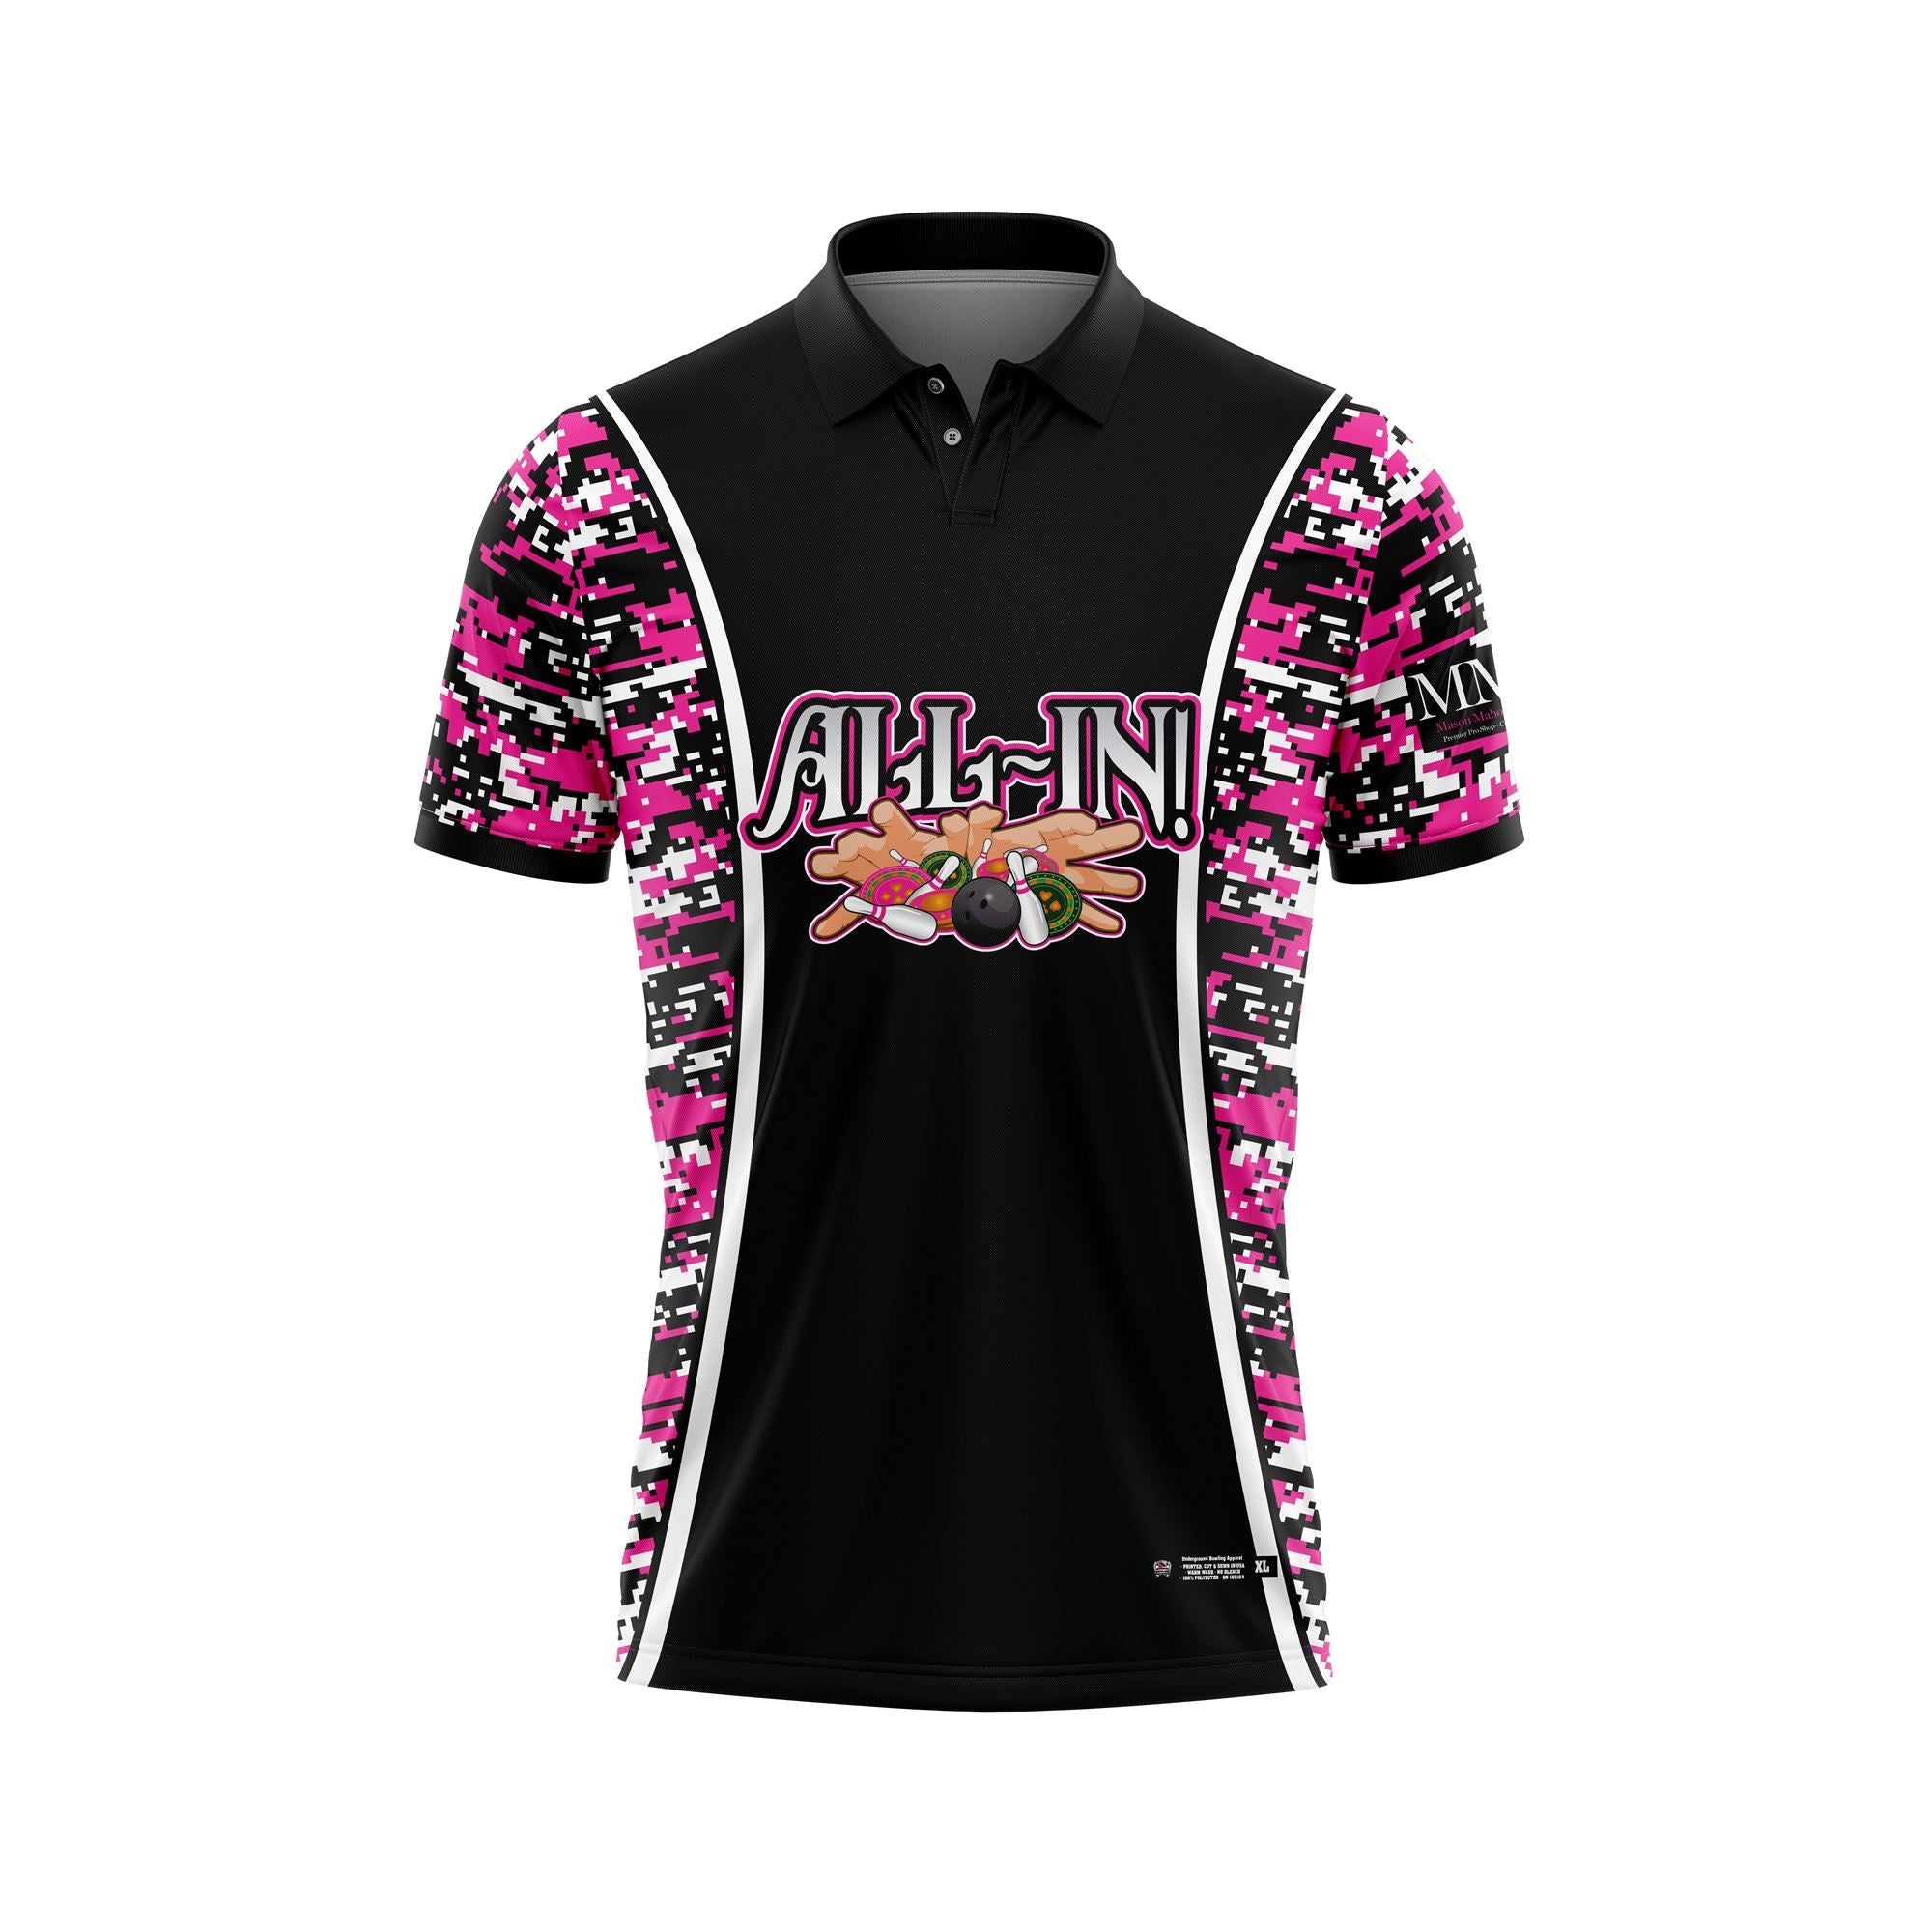 ALL-IN! Breast Cancer Jerseys